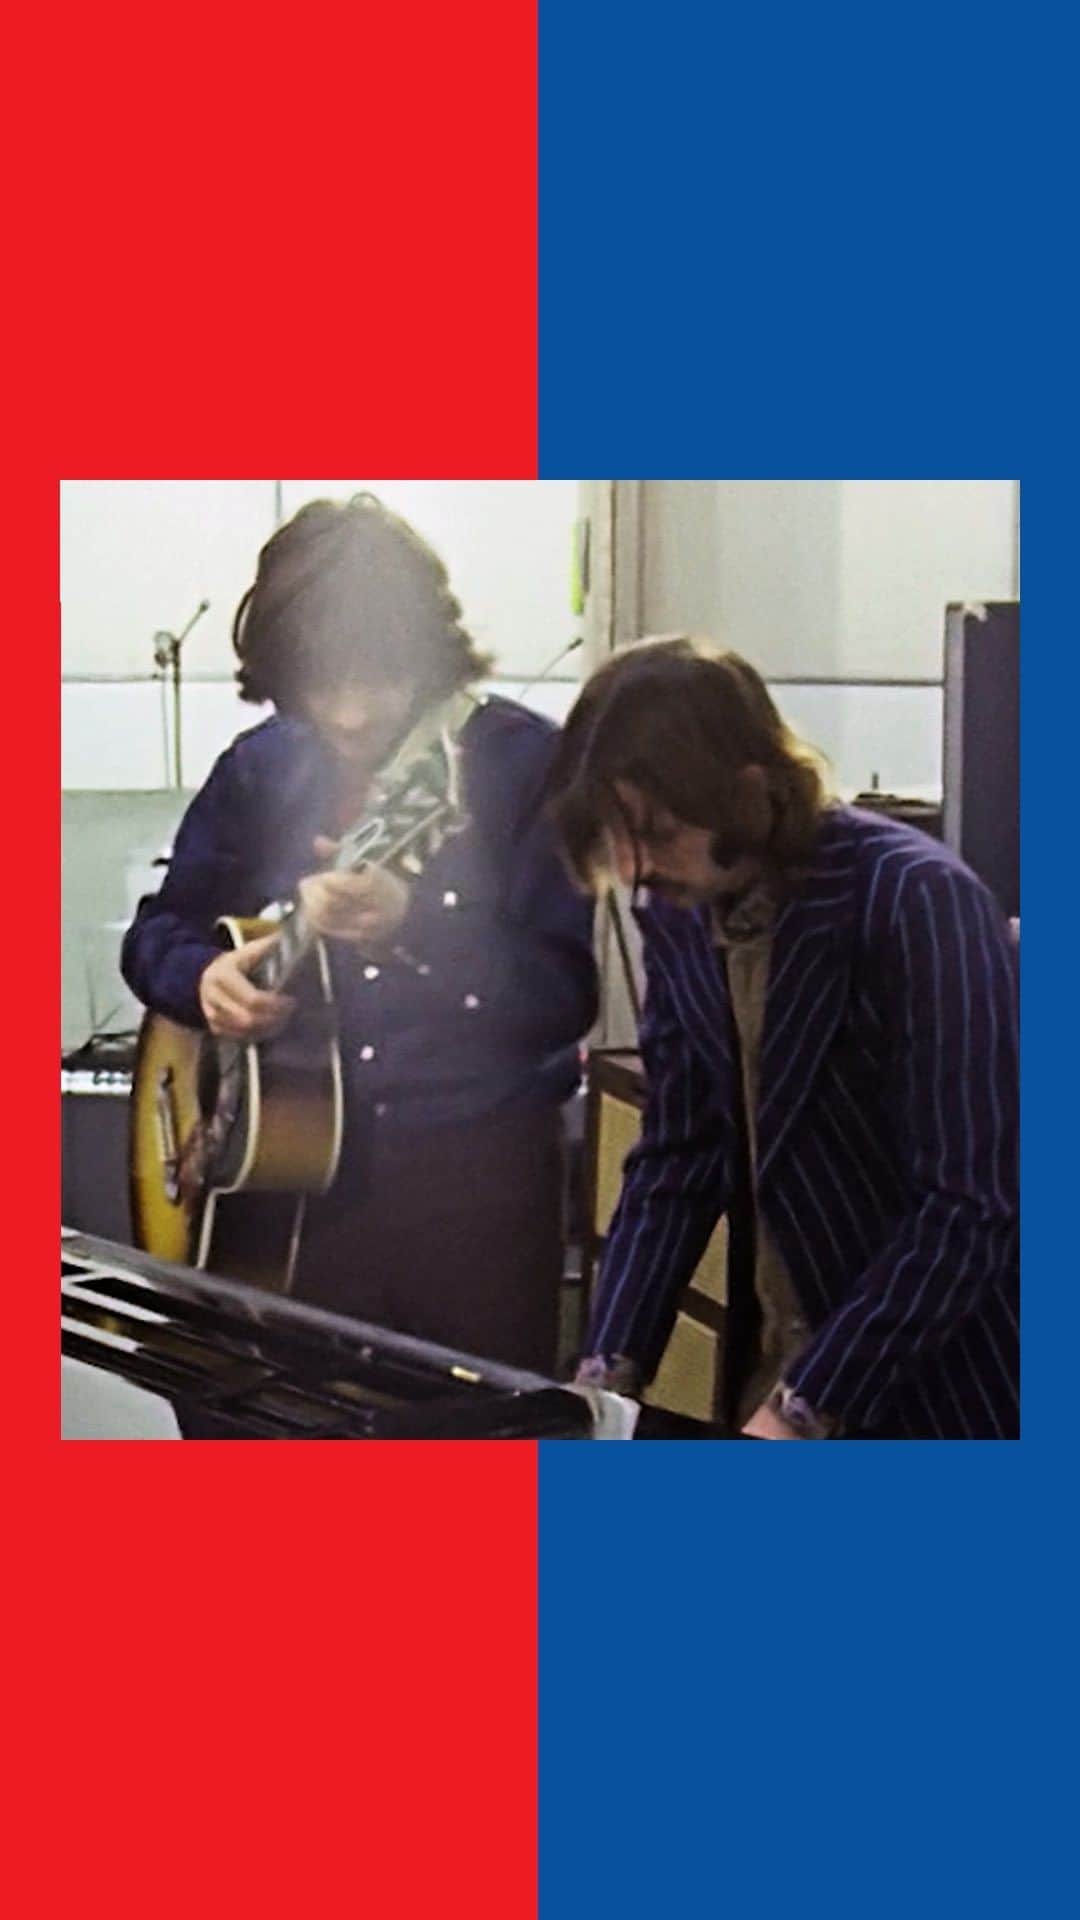 The Beatlesのインスタグラム：「“We could be warm, beneath the storm” - Ringo explains the inspiration behind his song, Octopus’s Garden. Are you listening to #RedandBlue? Which track are you most into right now?」